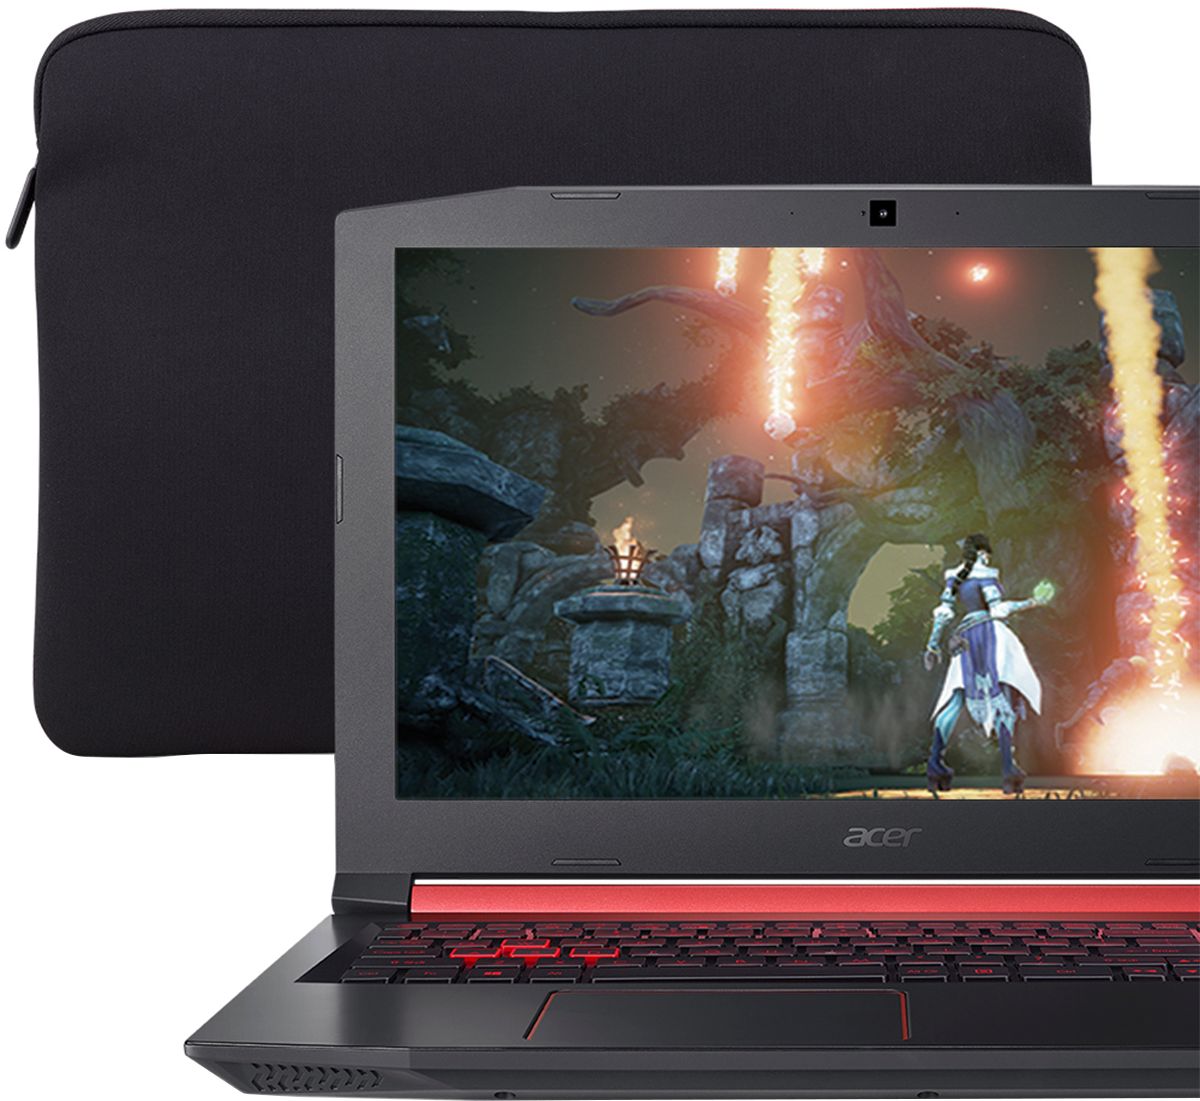 bruge Ære Integral Best Buy: Acer Nitro 5 15.6" Gaming Laptop Intel Core i5 8GB Memory NVIDIA  GeForce GTX 1050 Ti 256GB Solid State Drive Black AN515-53-55G9